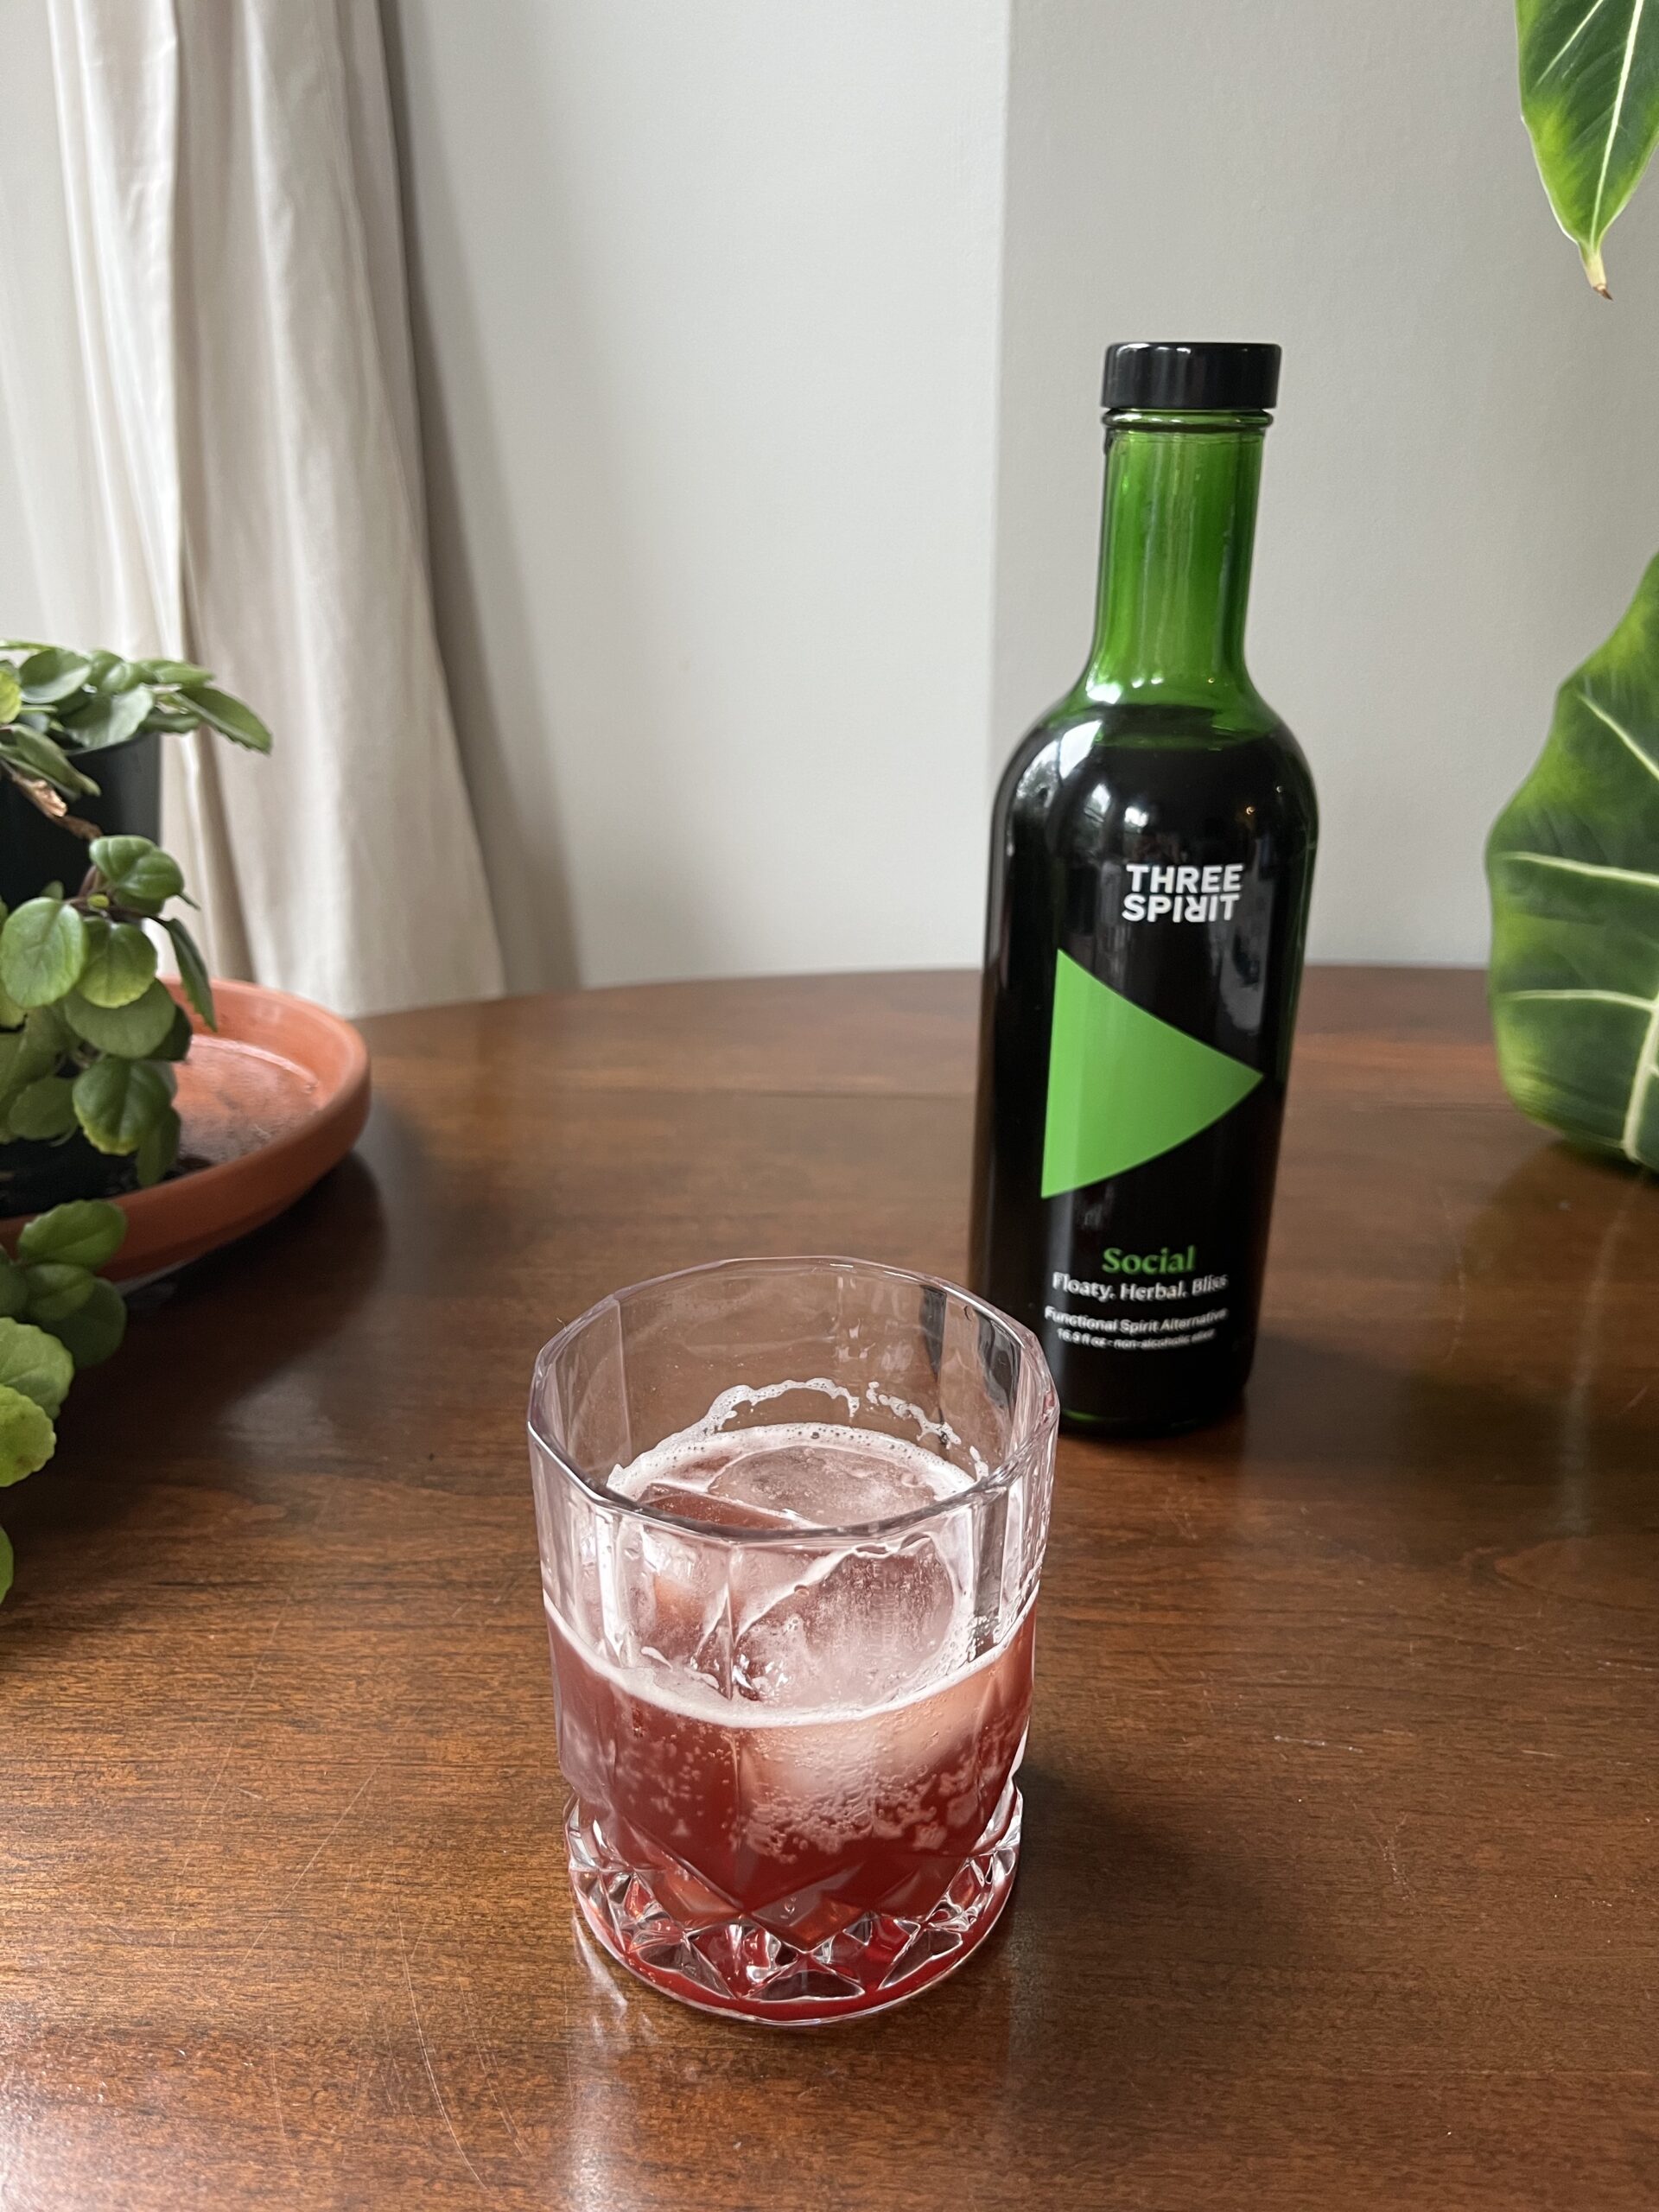 A bottle of Three Spirit Social Elixir stands on a wooden table beside a glass filled with a dark beverage and ice cubes, surrounded by green plants.